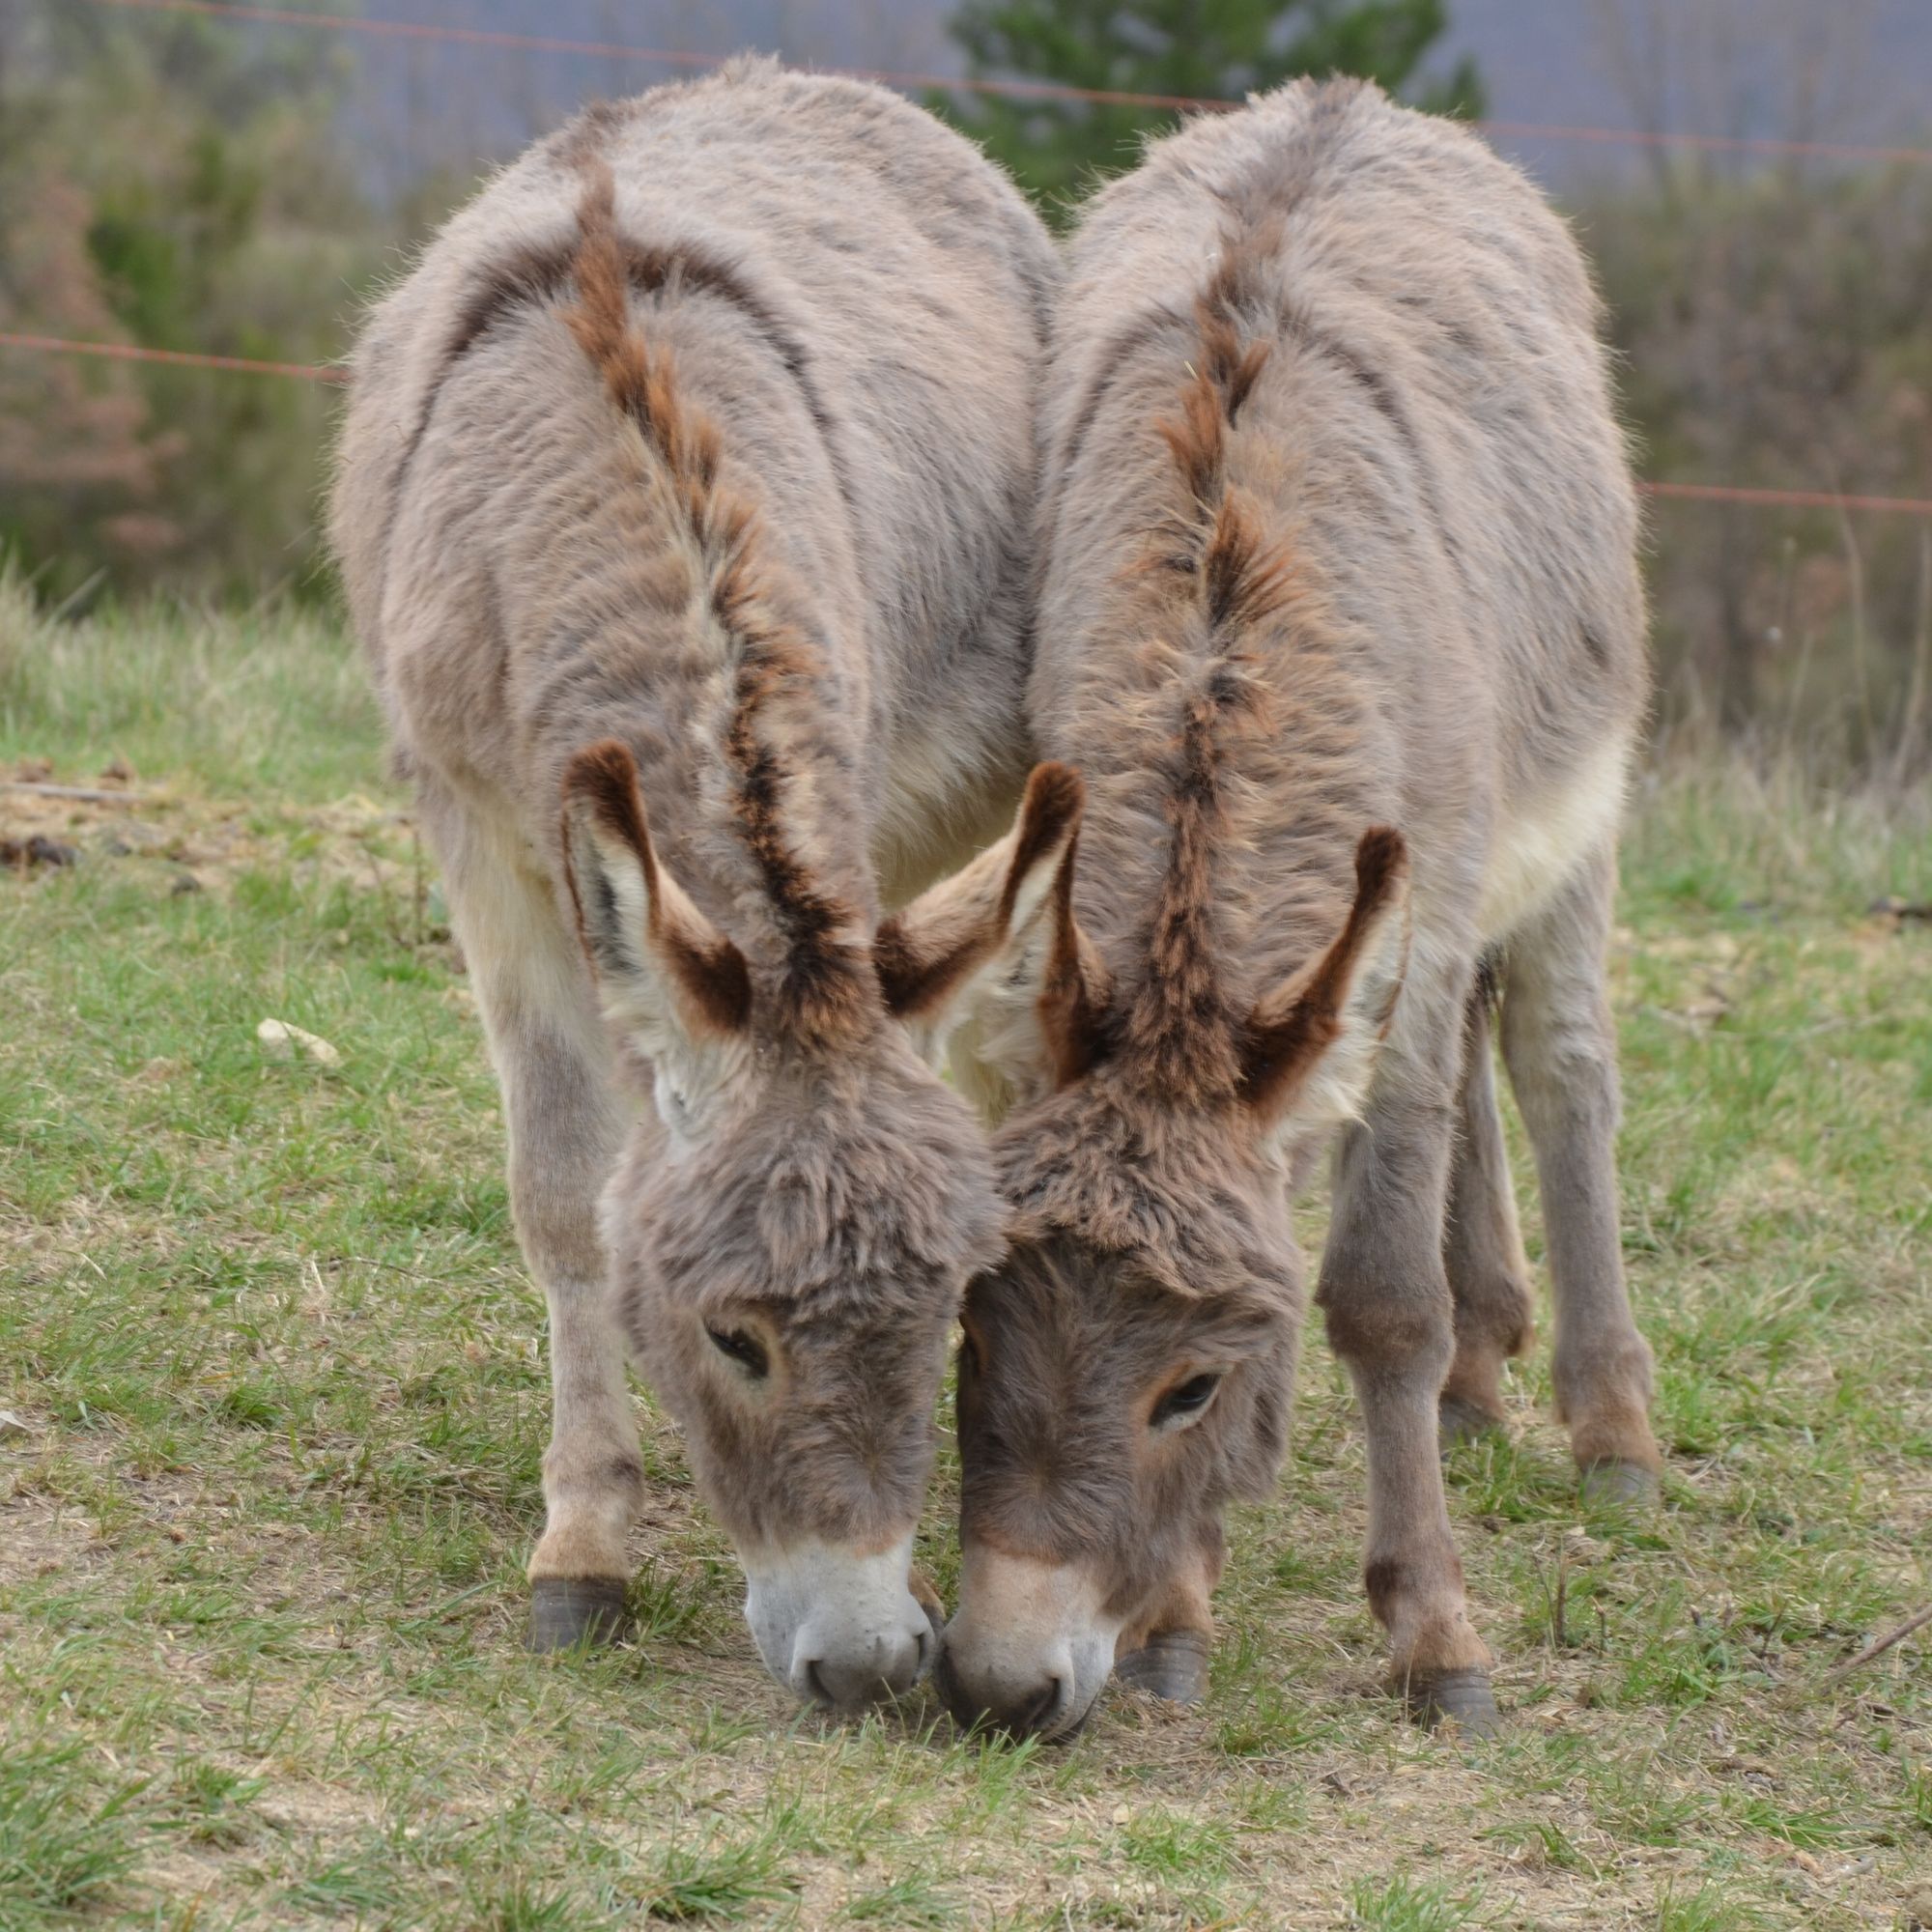 Two donkeys, side by side leaned over grazing. Their faces are touching, making it seem as if they are reaching for the same blade of grass. Behind them a blurry background of a grey countryside.